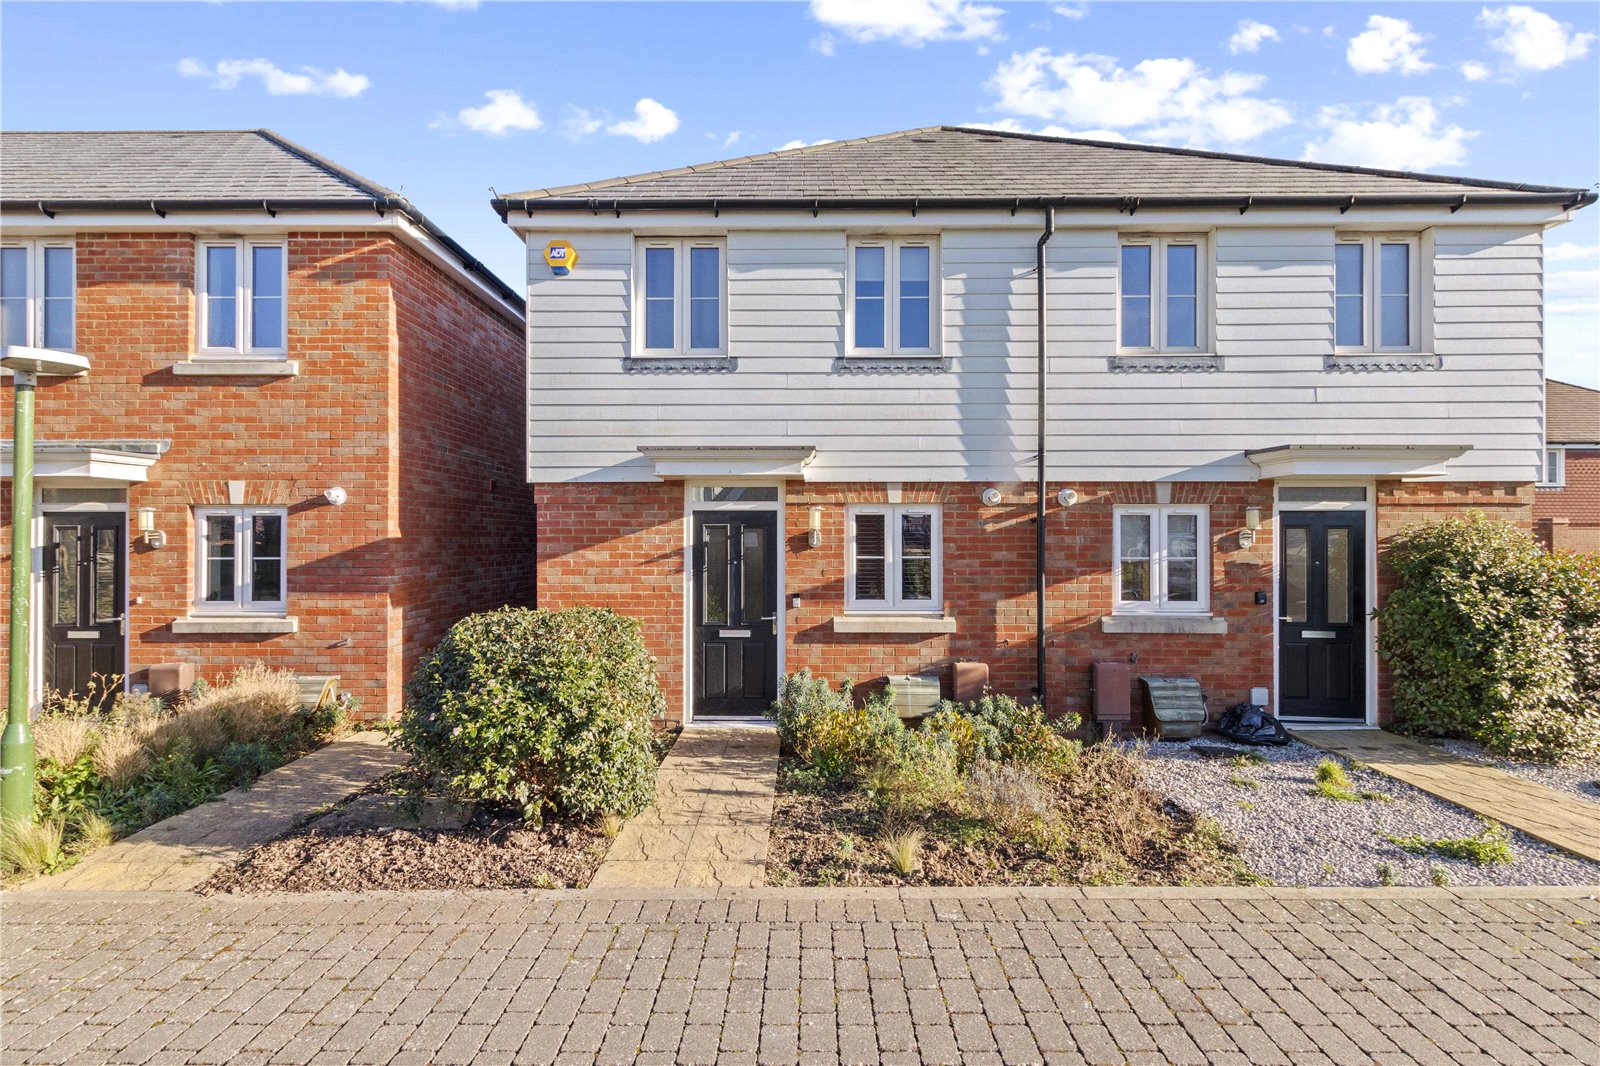 2 bed house for sale in Hangar Drive, Tangmere - Property Image 1